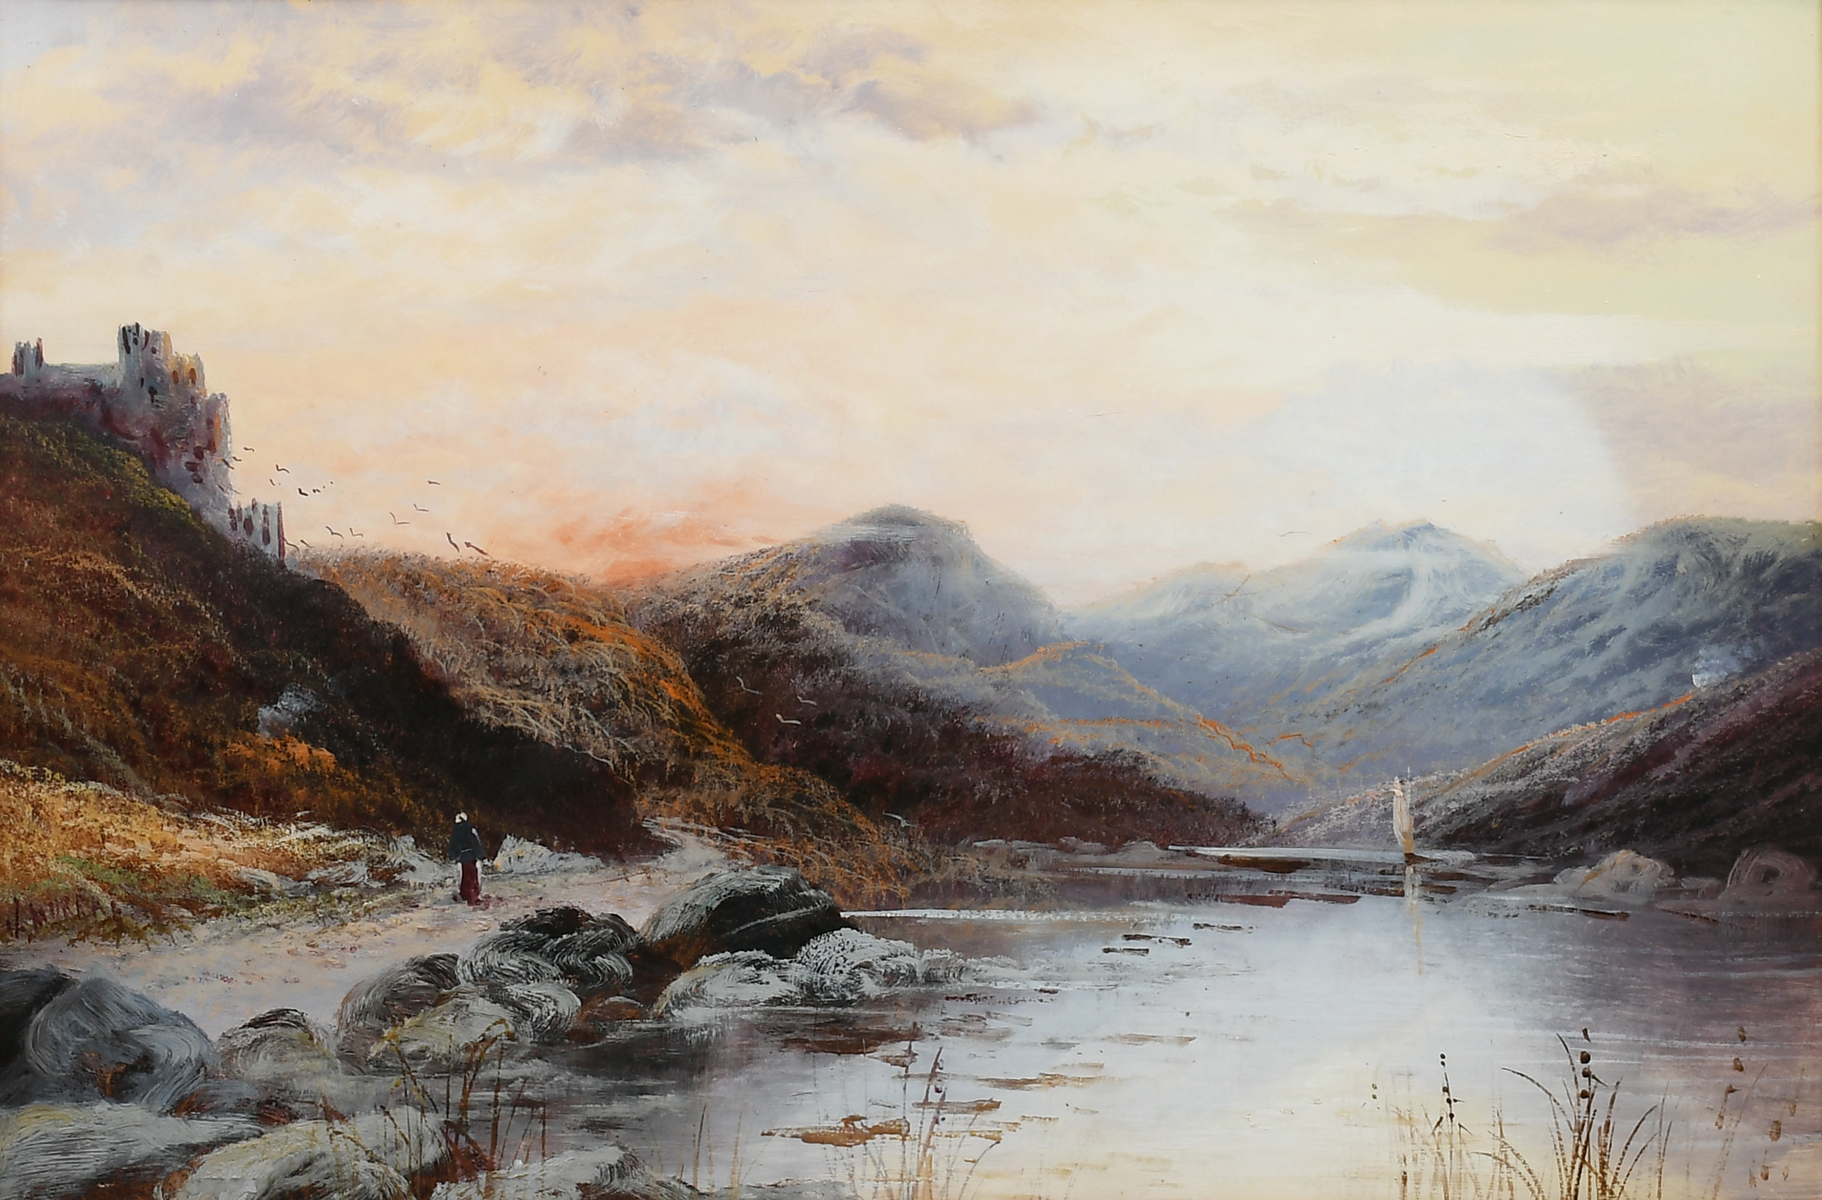 HIGHLAND LOCH PAINTING BY J. MURRAY: